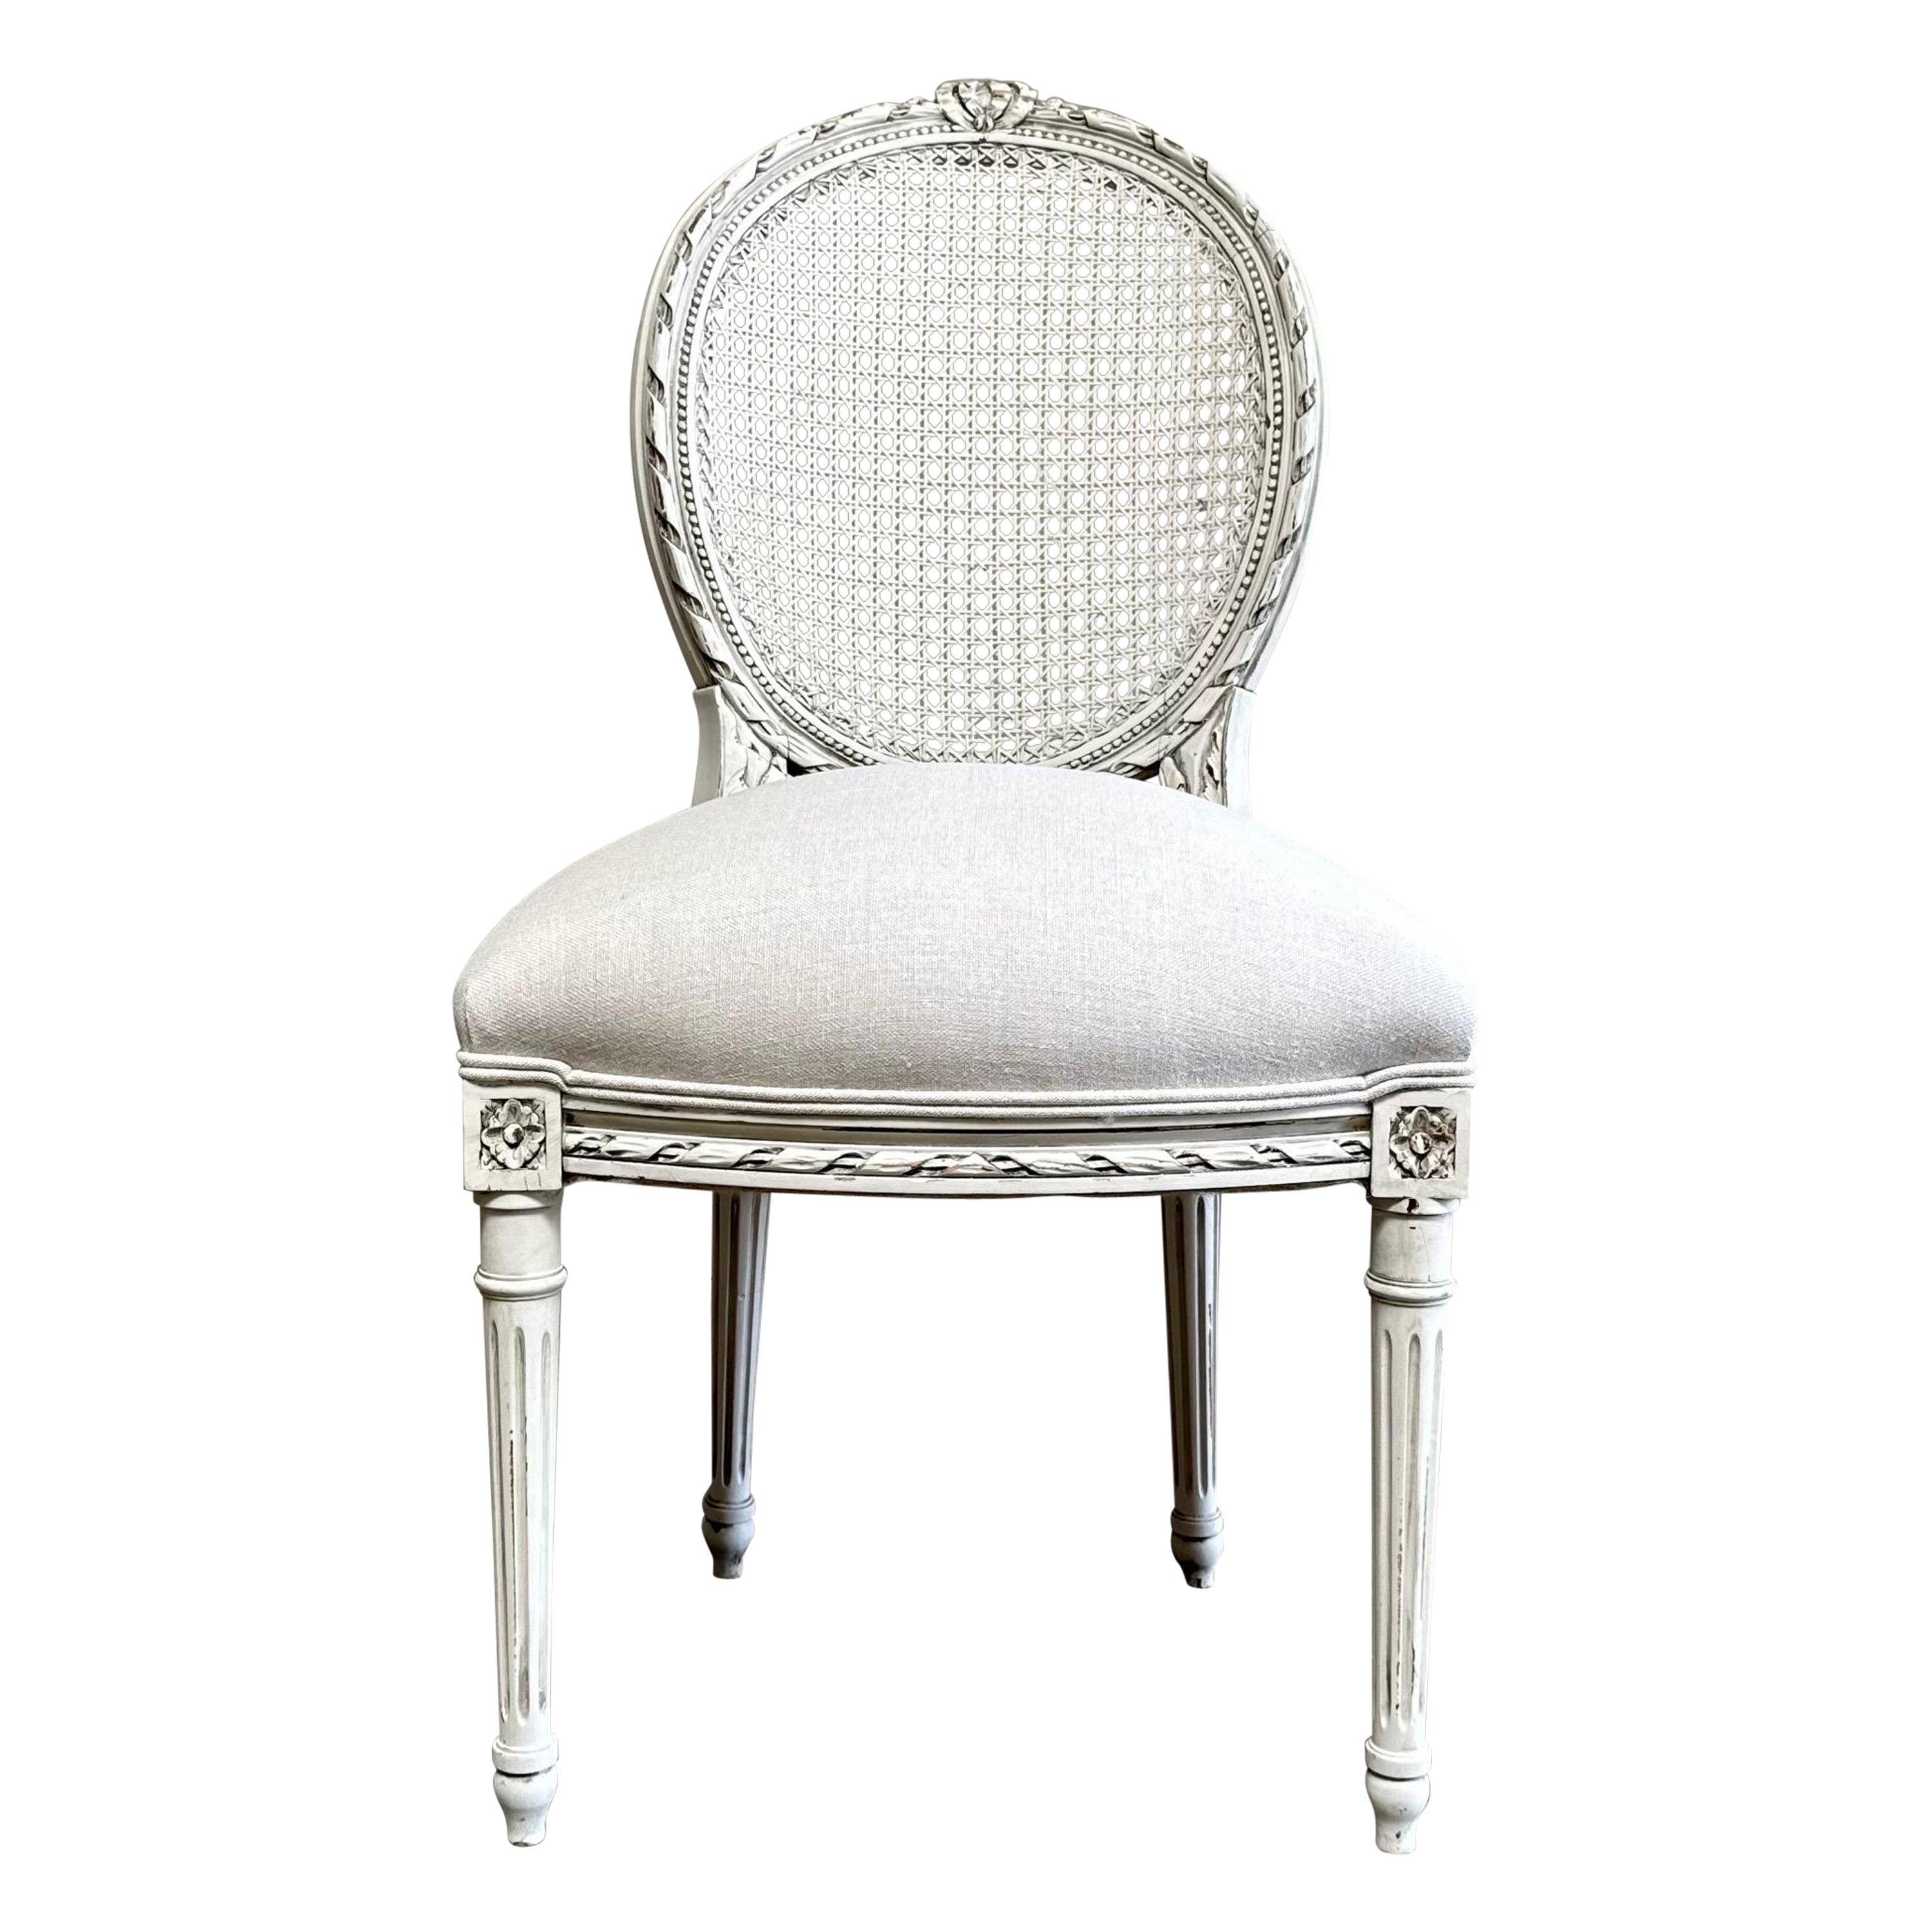 Antique Louis XVI Style French cane back chair in Oyster White Finish For Sale